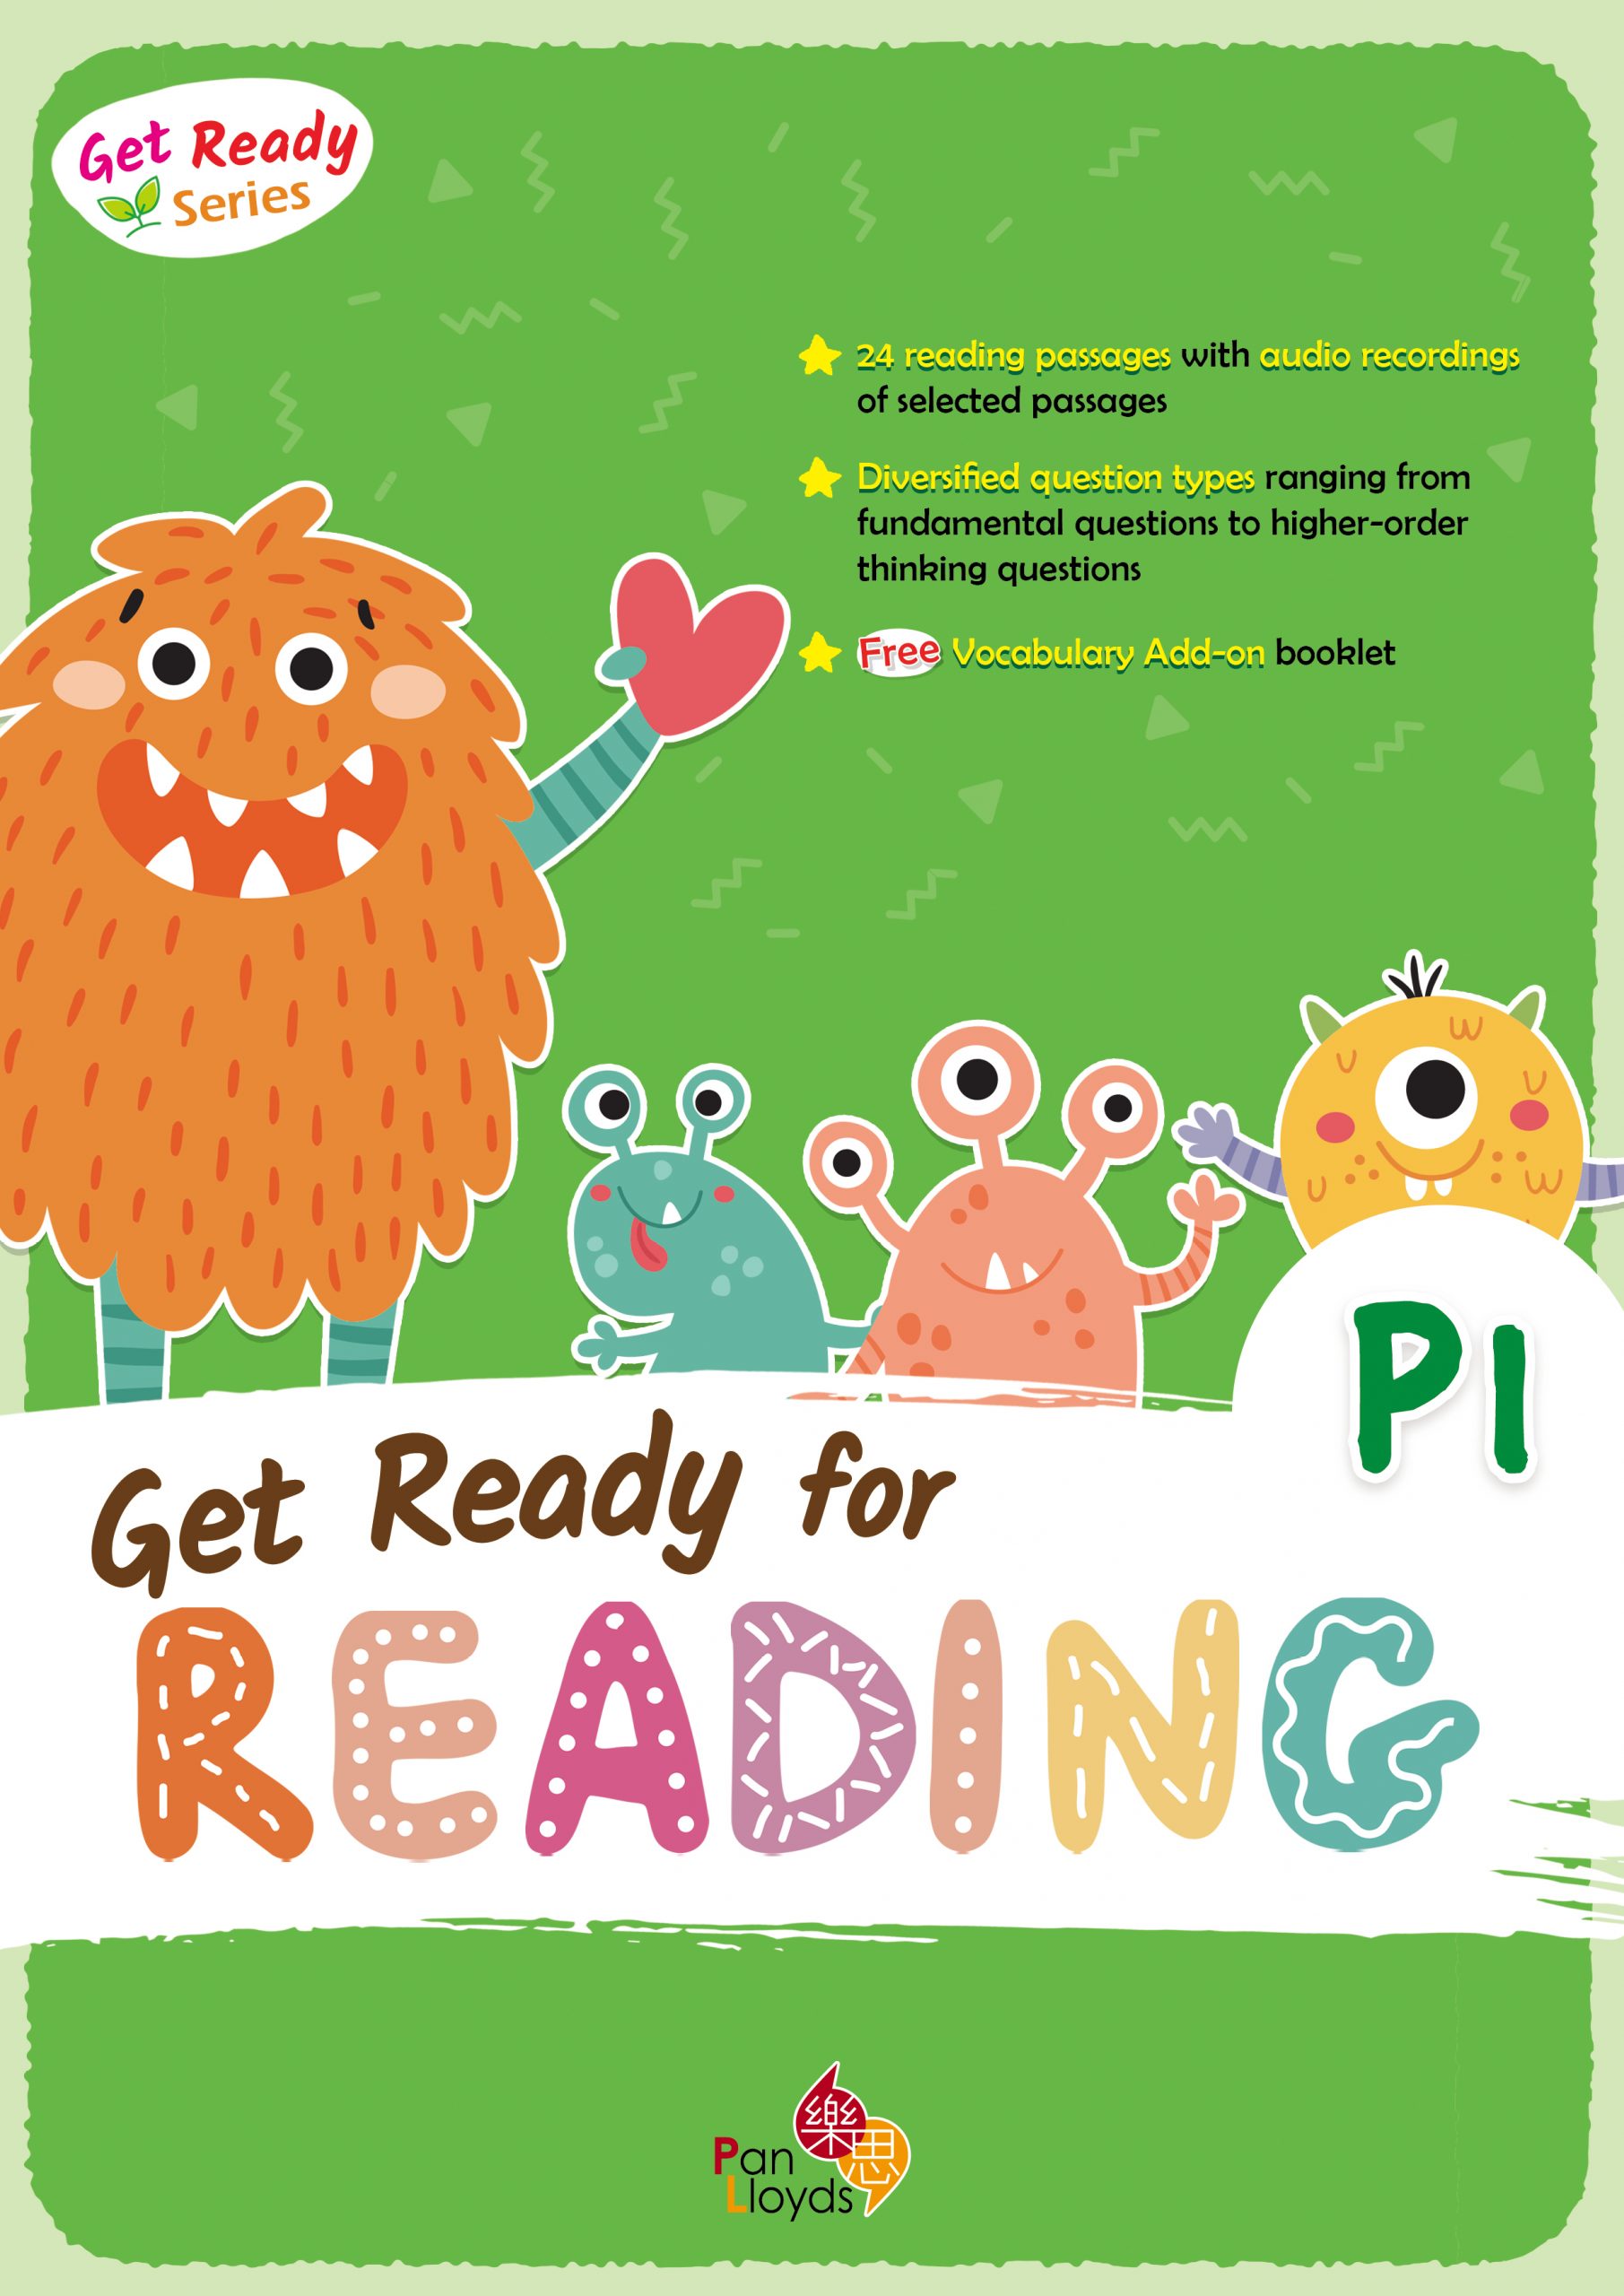 Get Ready Series: Get Ready for Reading